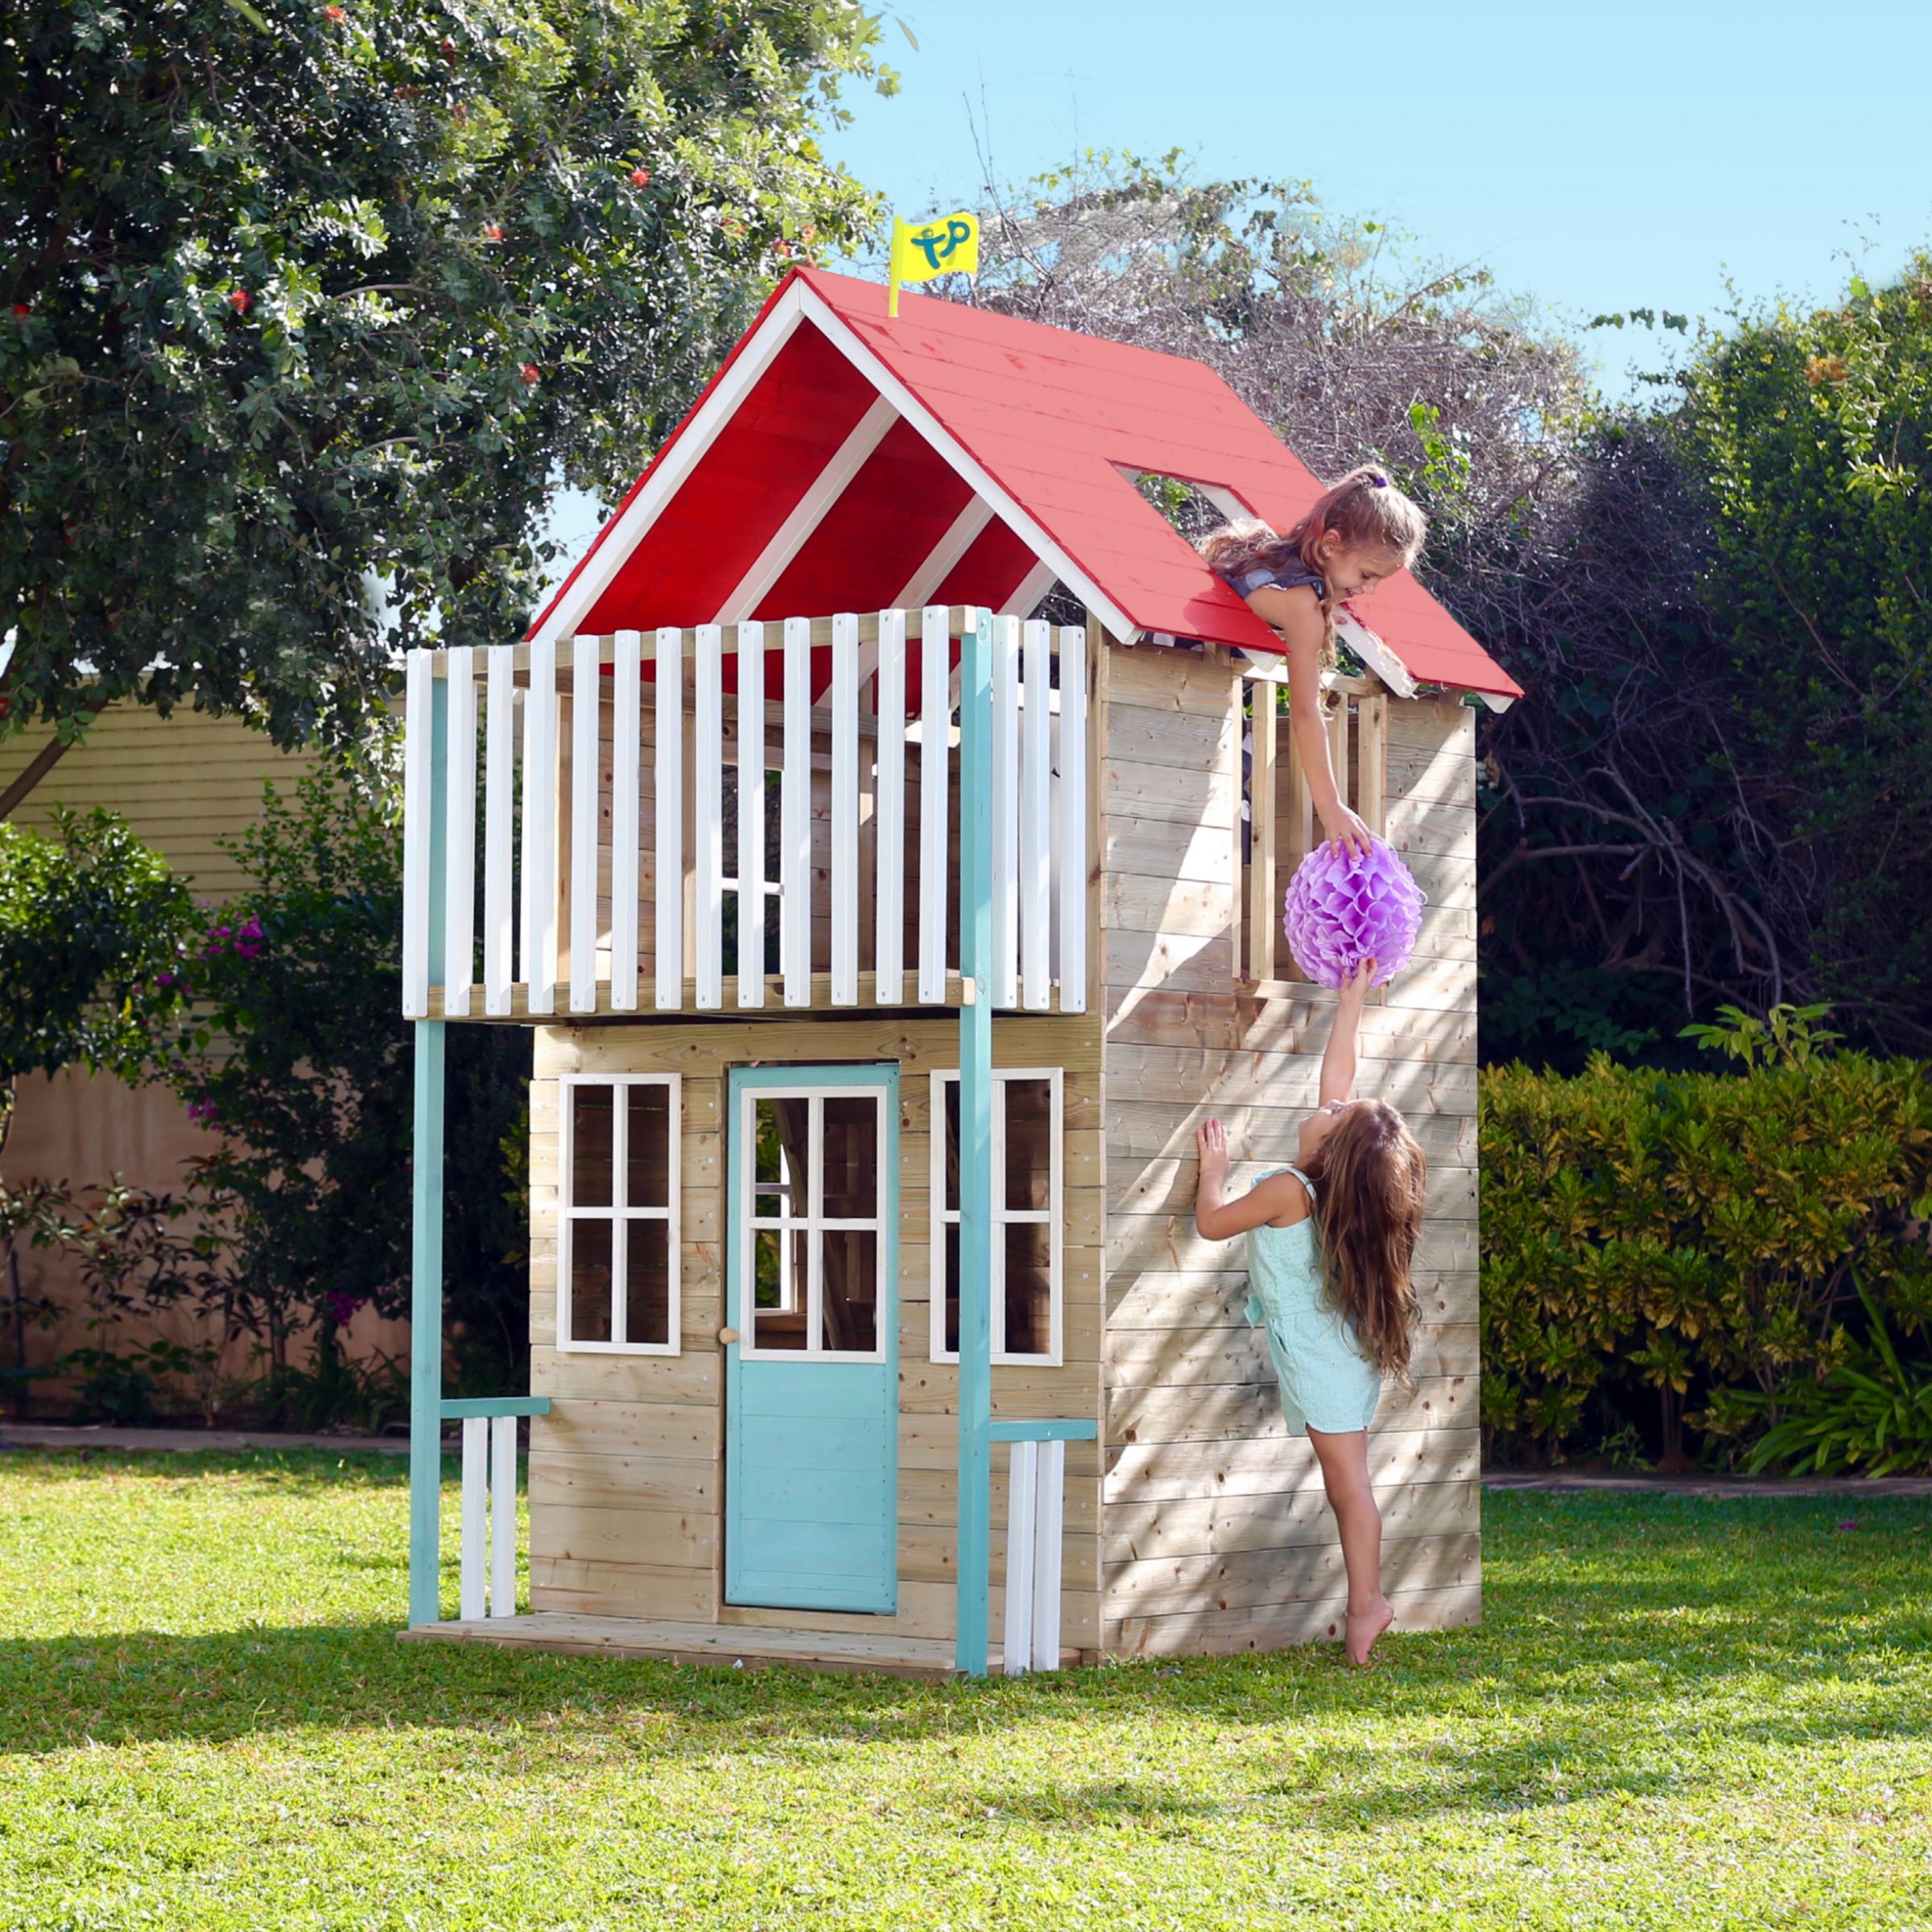 double storey wooden playhouse